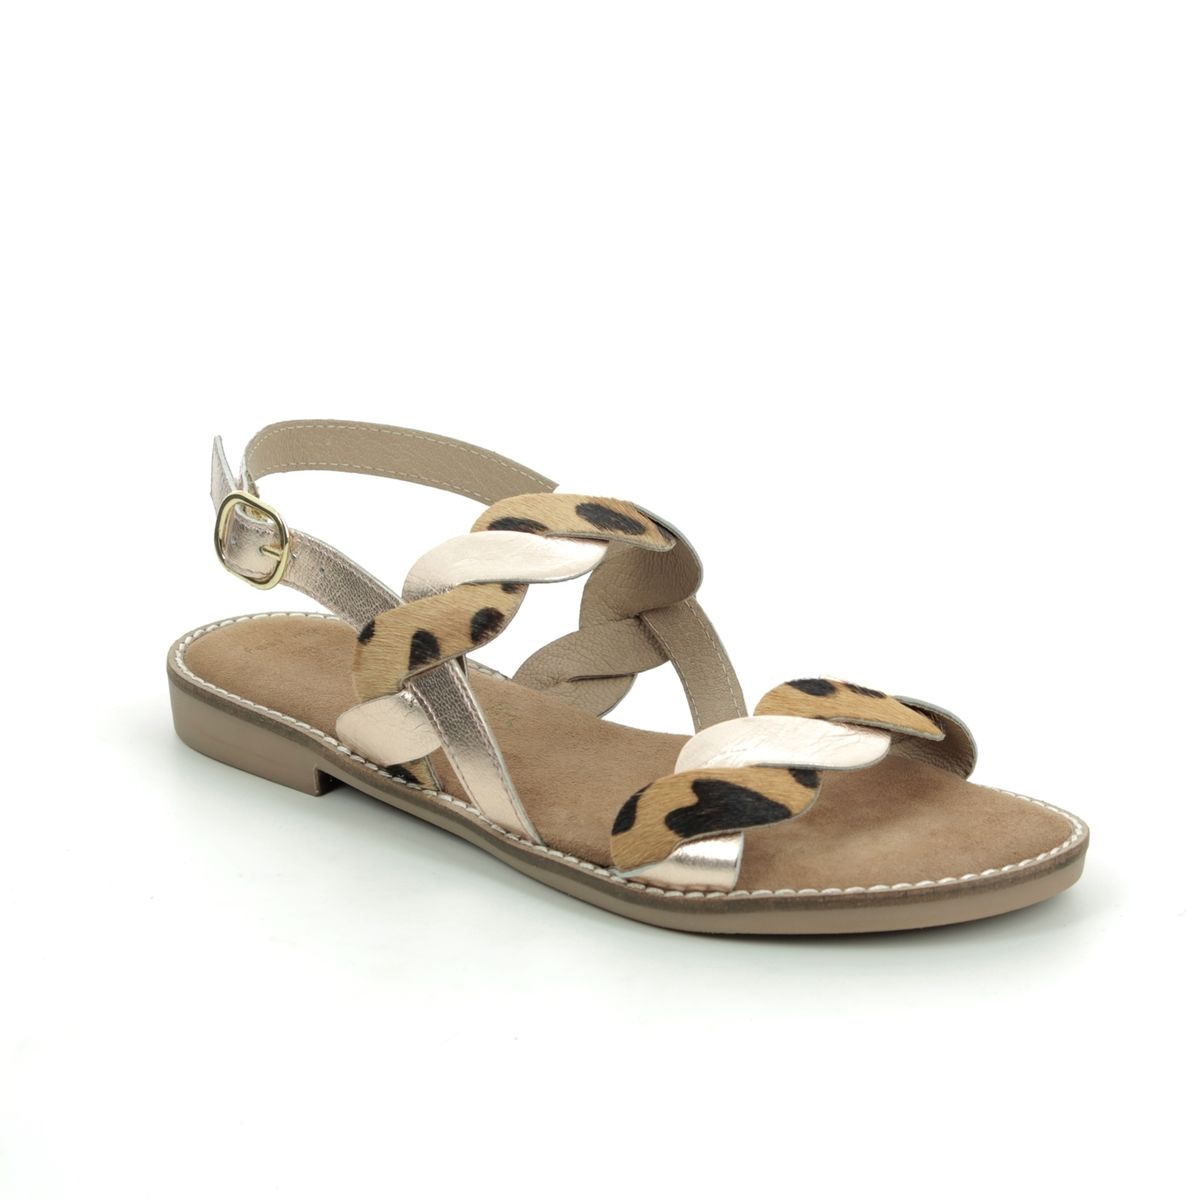 Marco Tozzi New Diamond Rose Gold Womens Flat Sandals 28130-24-532 in a Leopard Leather in Size 37